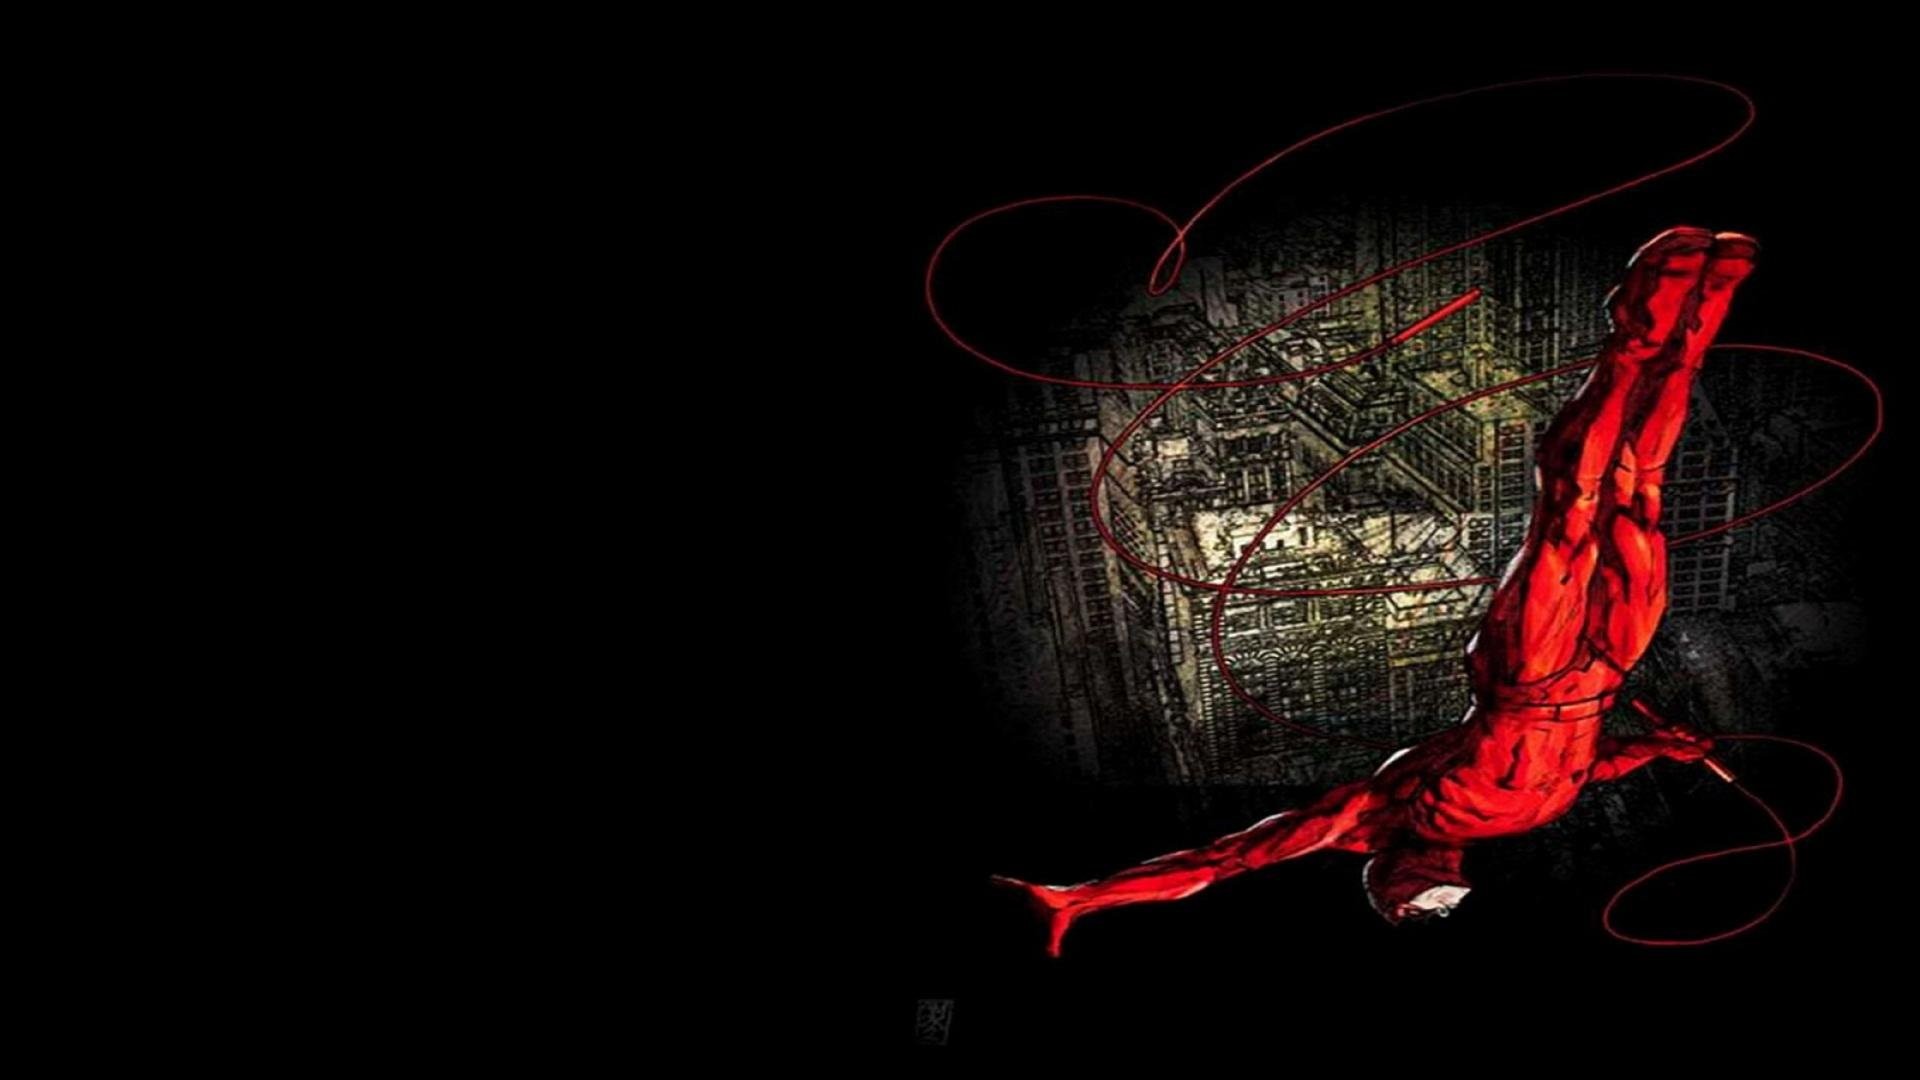 Daredevil jumping background